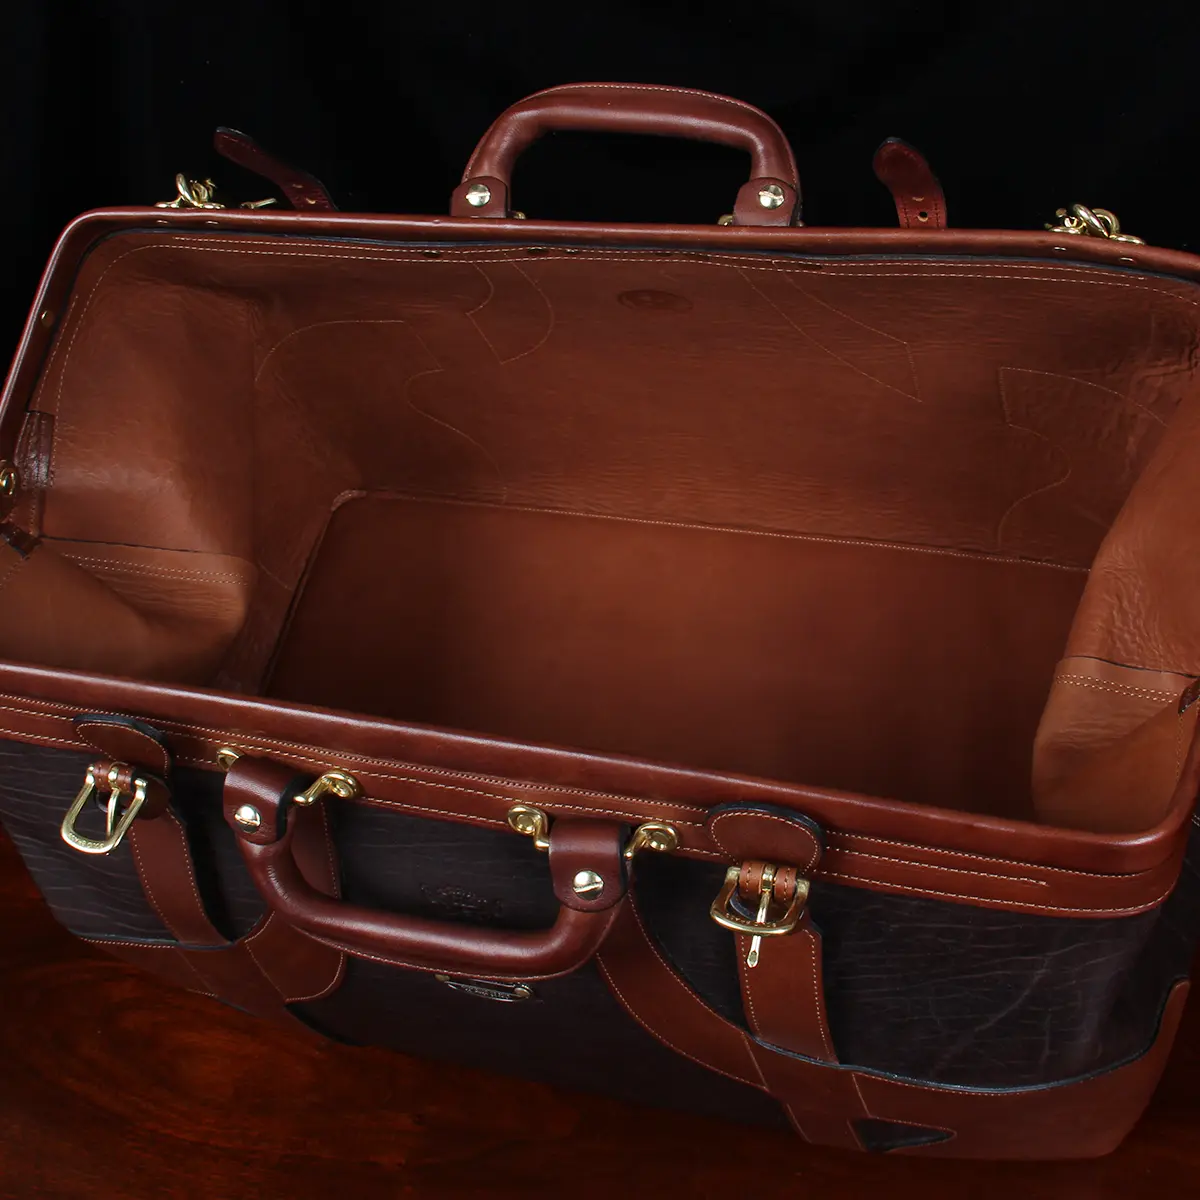 COLLECTING LOUIS VUITTON - PART 9 - Hardcase Suitcases Luggage